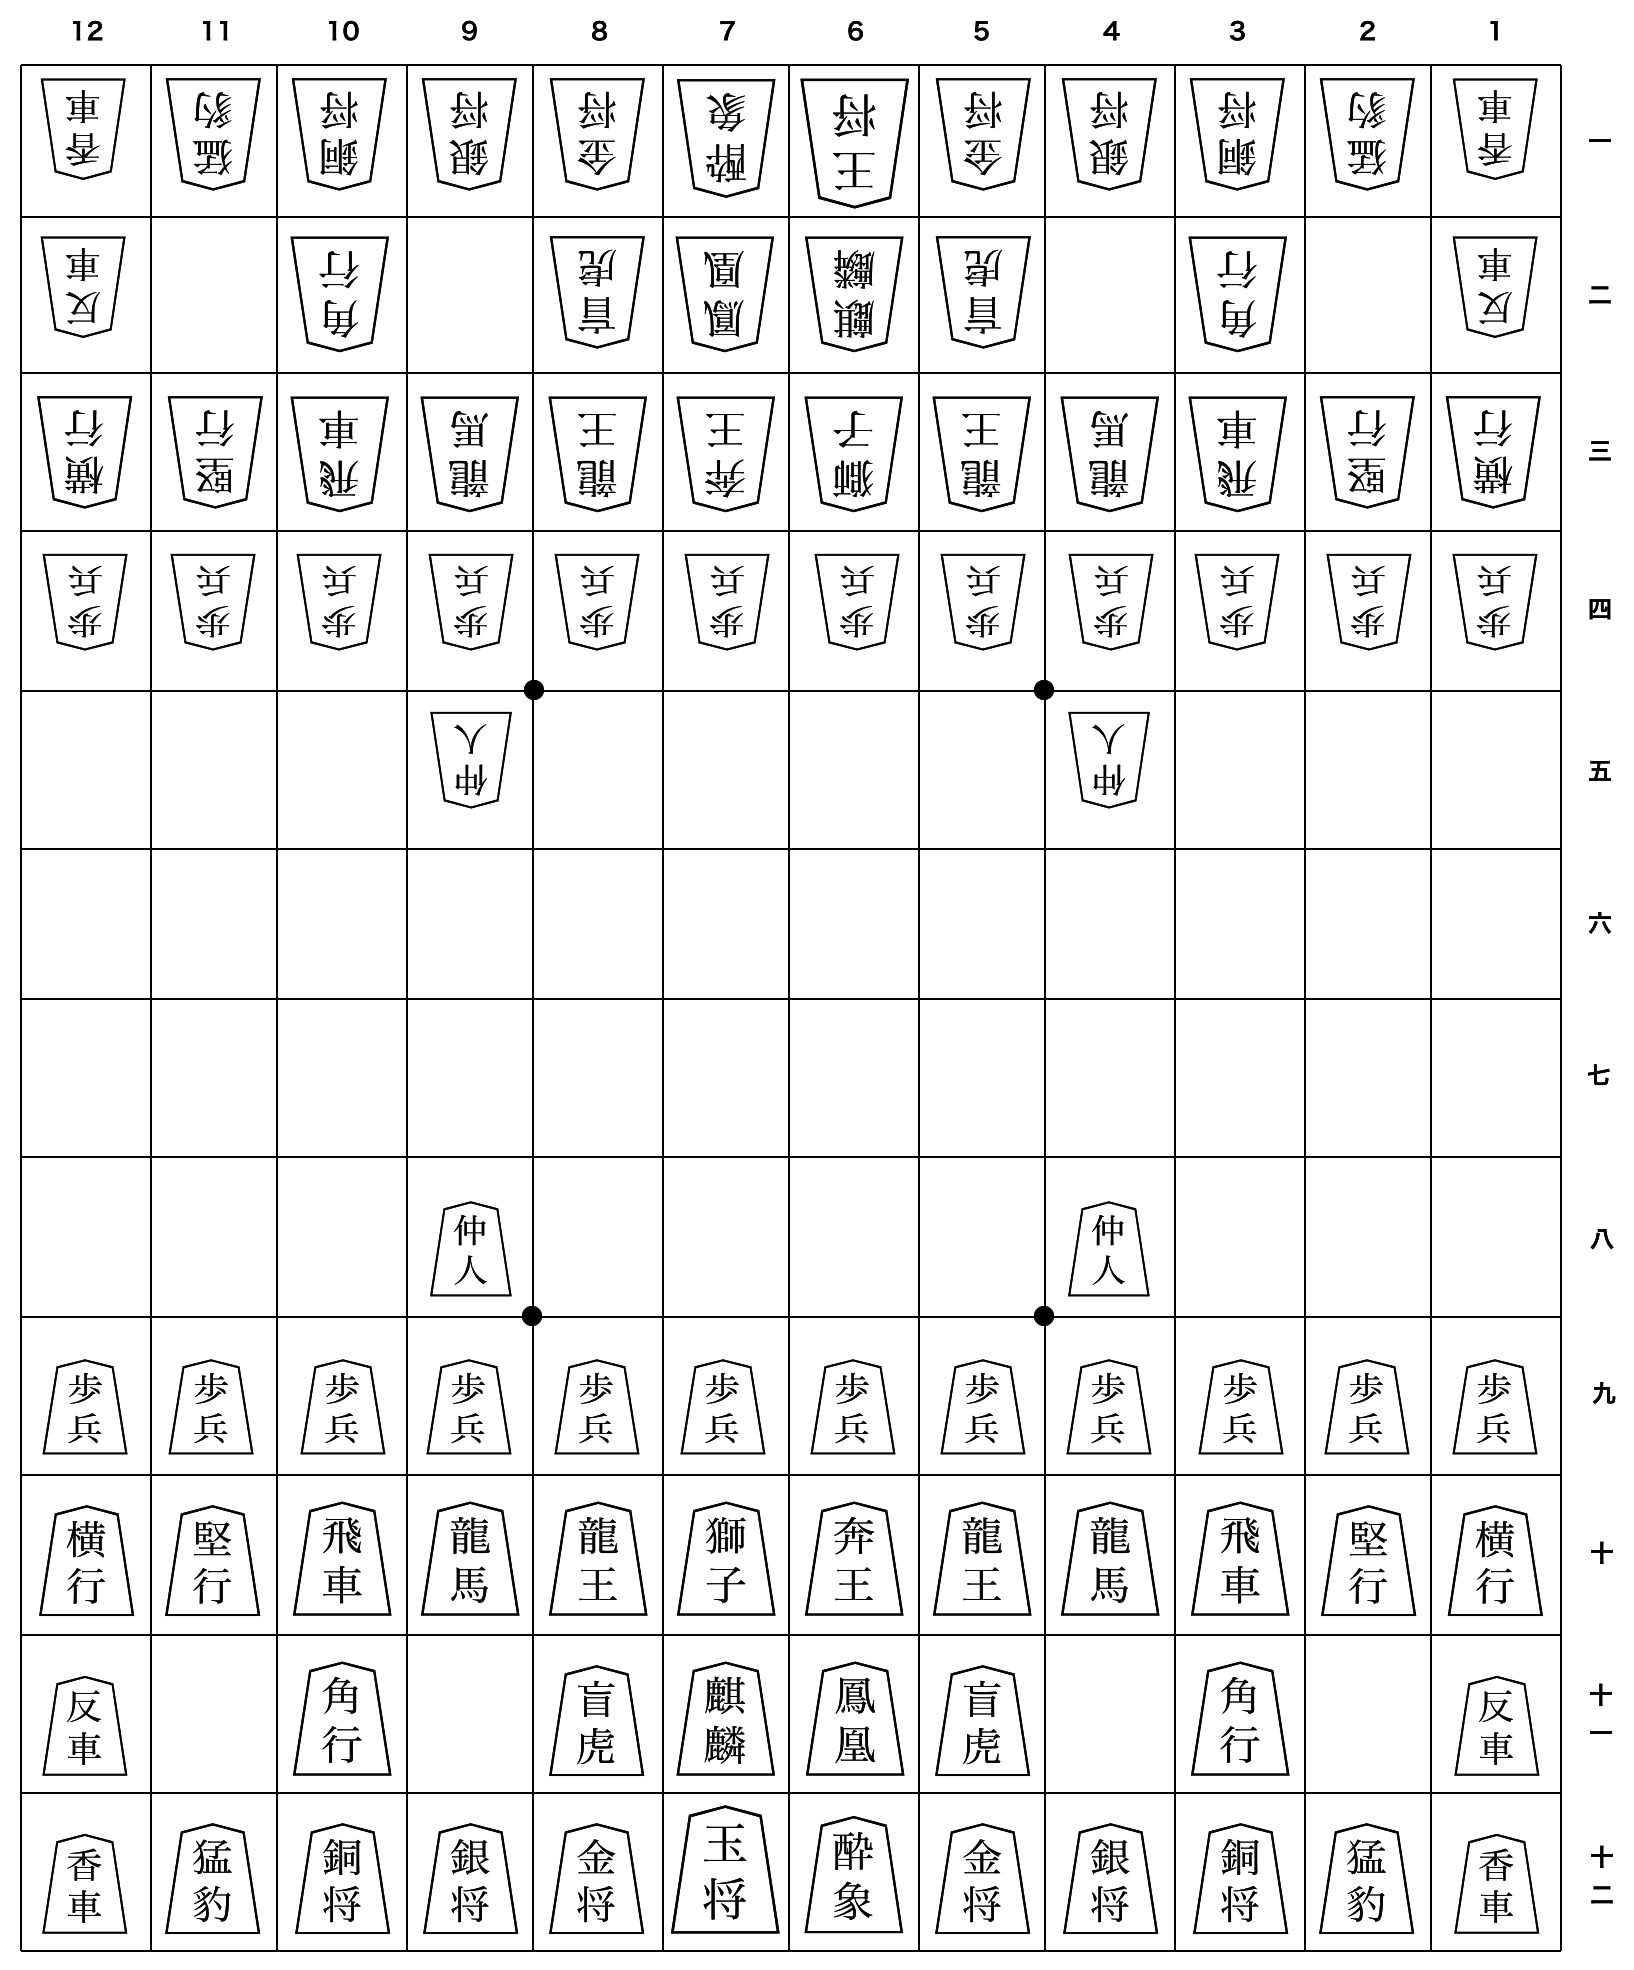 Play Shogi online with Game Courier